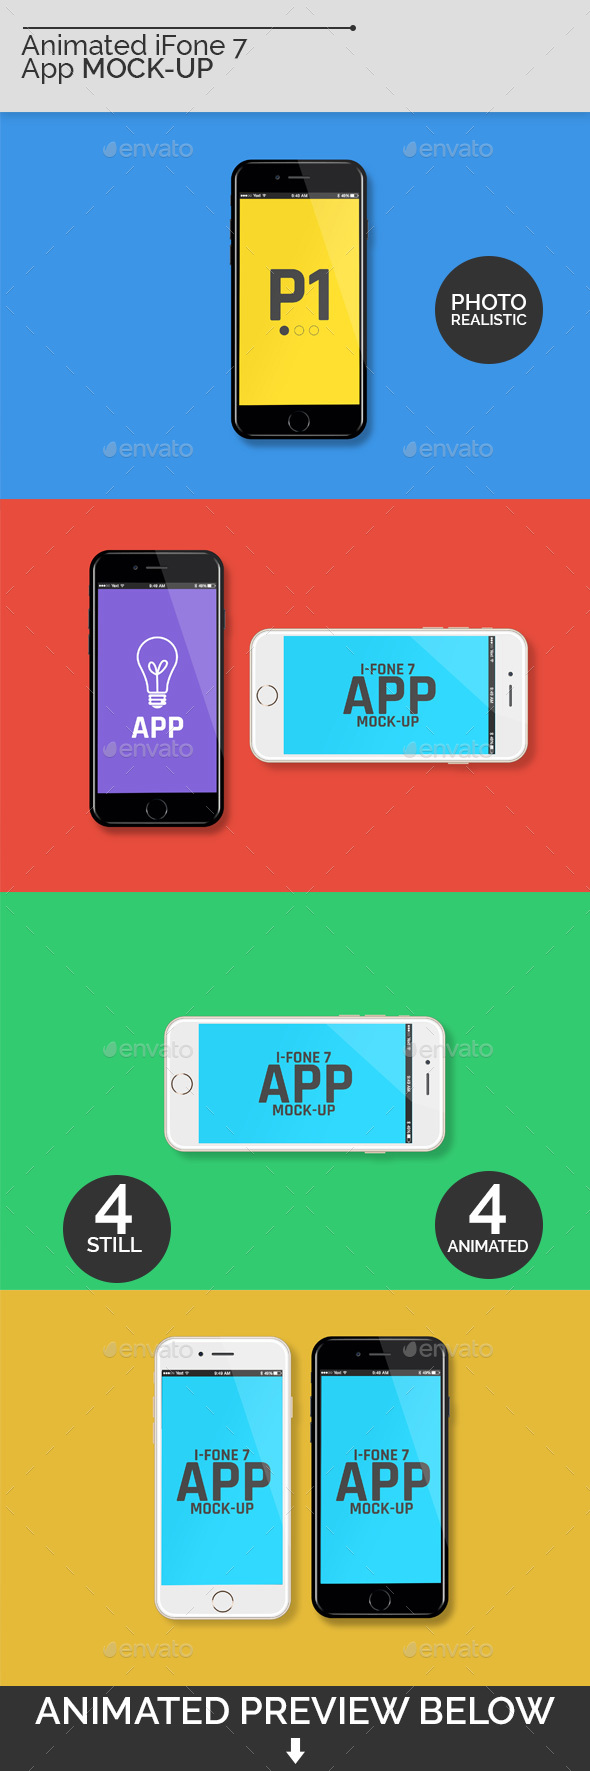 Download Animated iFone 7 Mock-Ups Graphic Free Download - Nulled ...